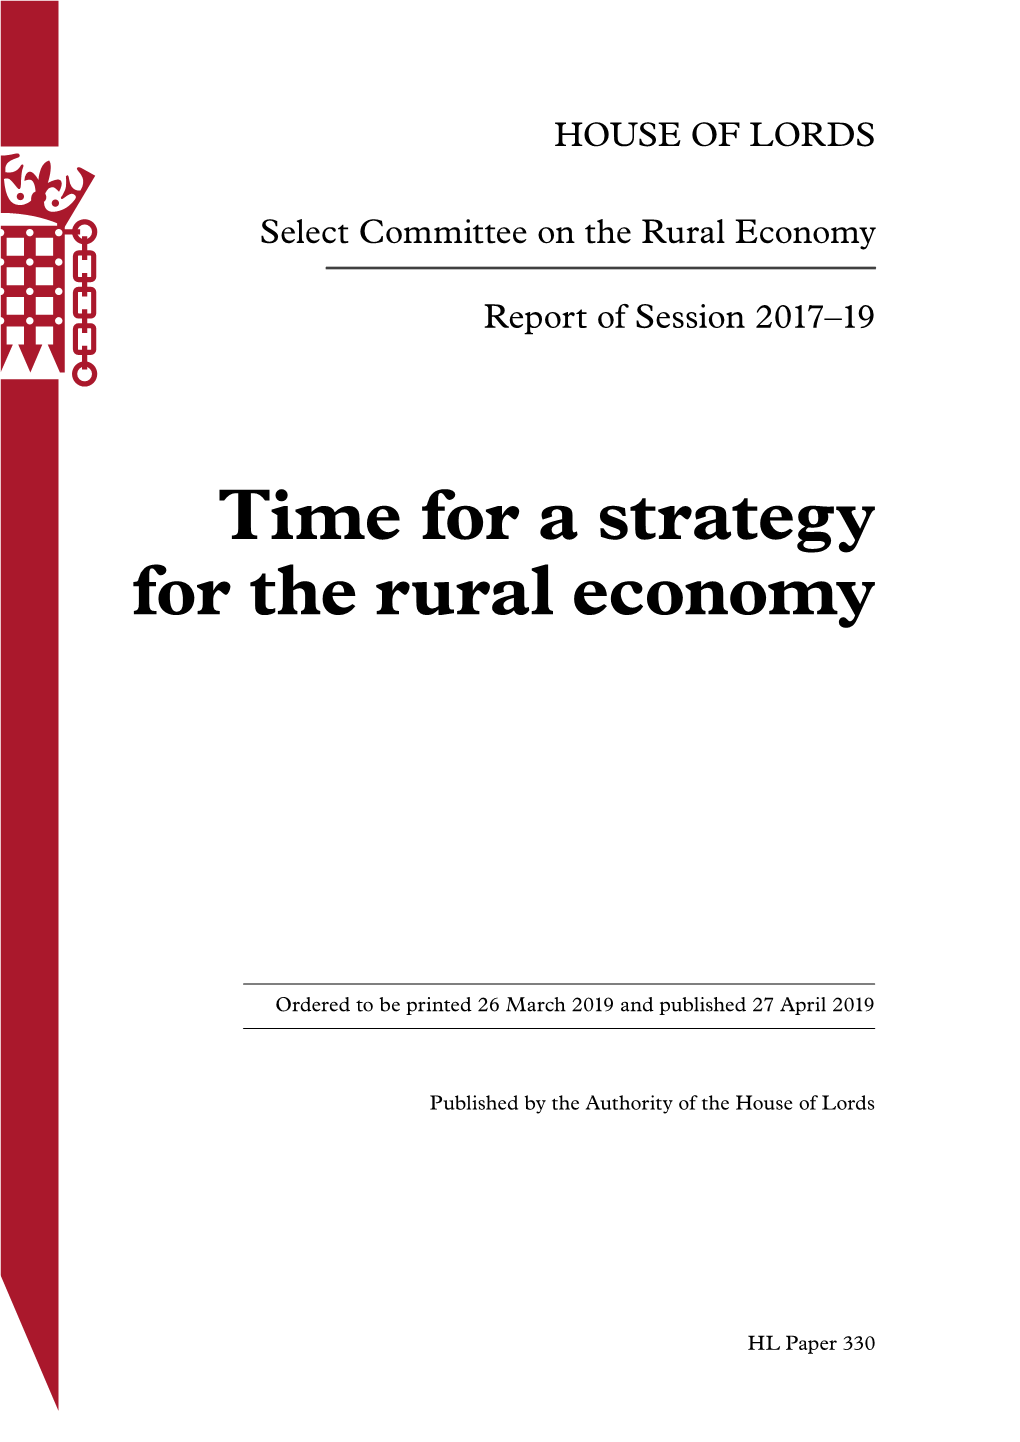 Time for a Strategy for the Rural Economy